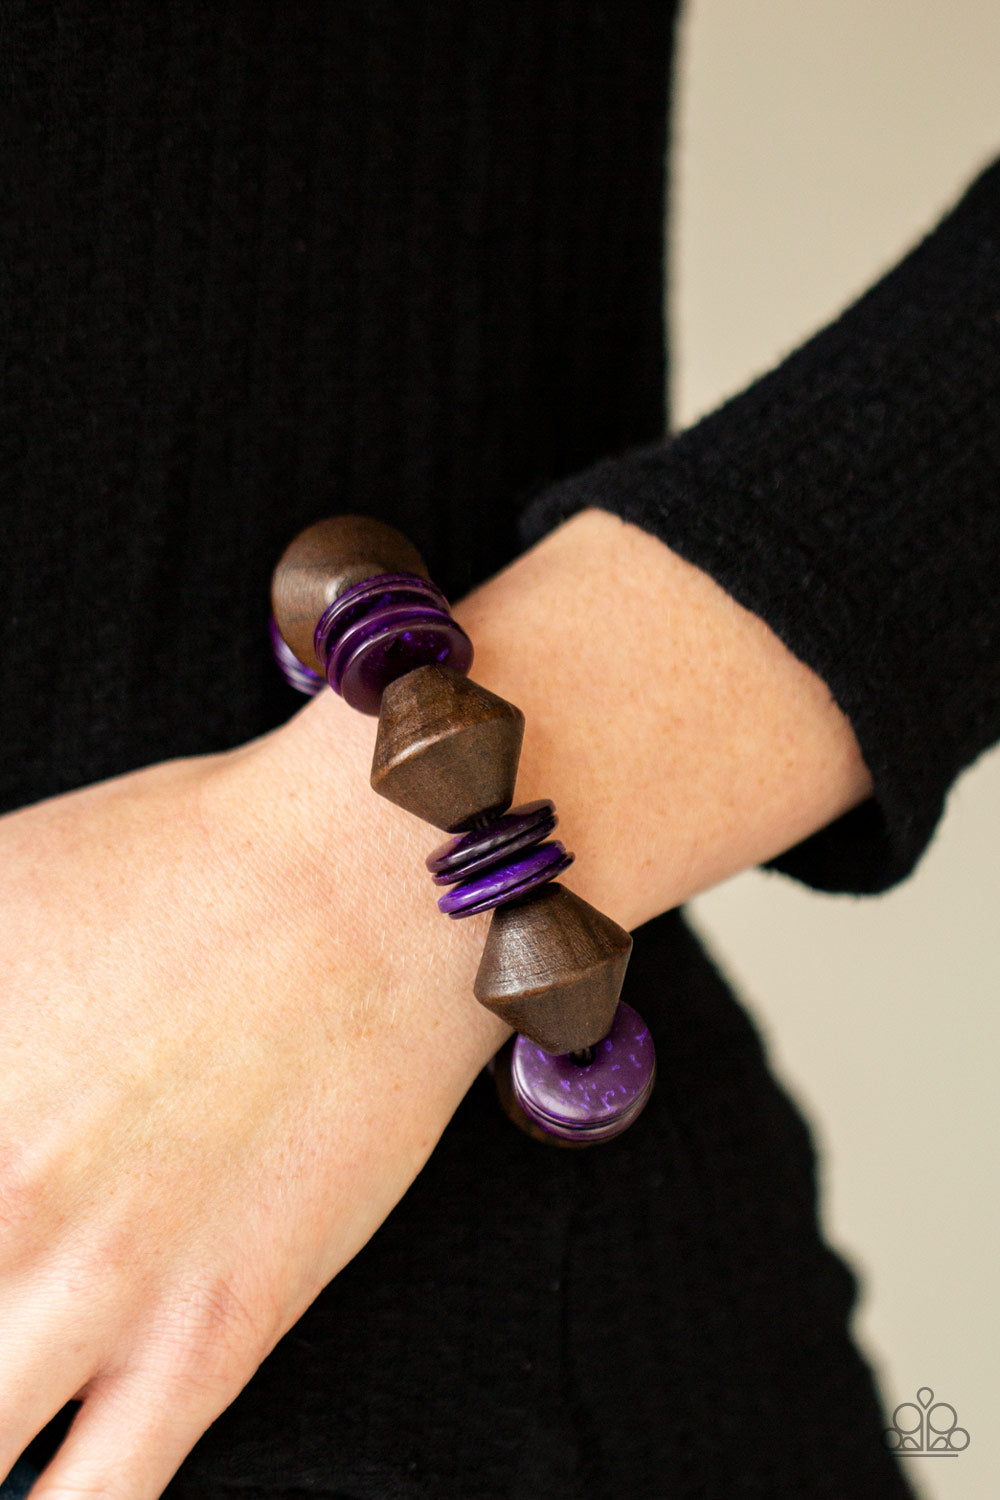 Bermuda Boardwalk Purple Wooden Bracelet - Paparazzi Accessories  Purple wooden discs and chunky brown wooden beads are threaded along a stretchy band around the wrist, creating a summery look.  All Paparazzi Accessories are lead free and nickel free!  Sold as one individual bracelet.